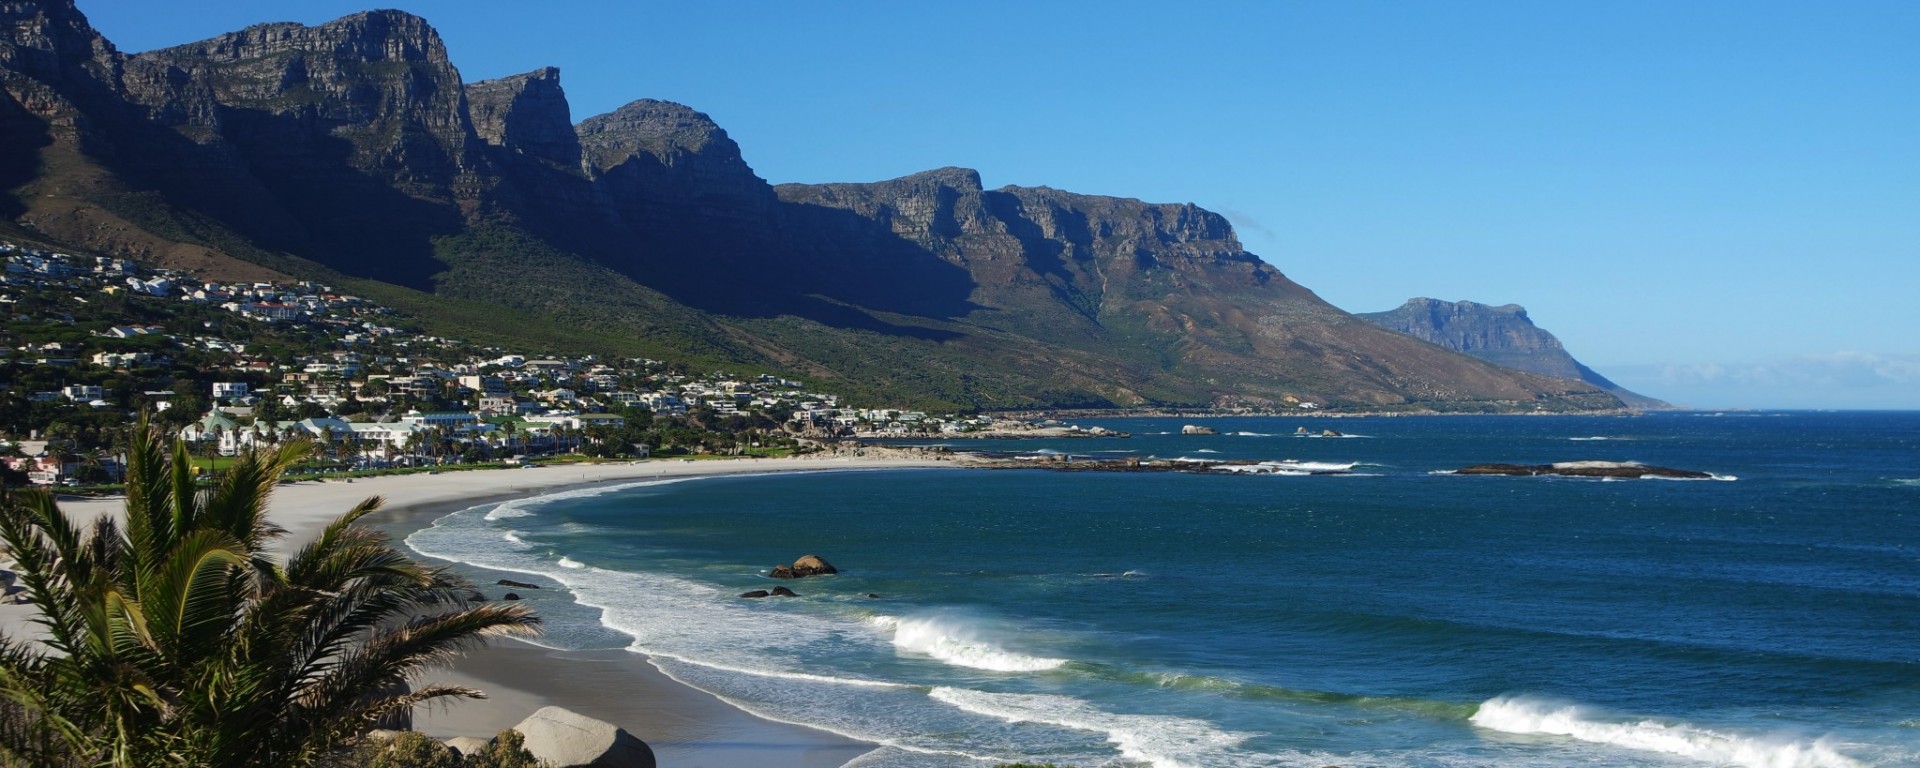 Fall in love with Cape Town.. Here's how